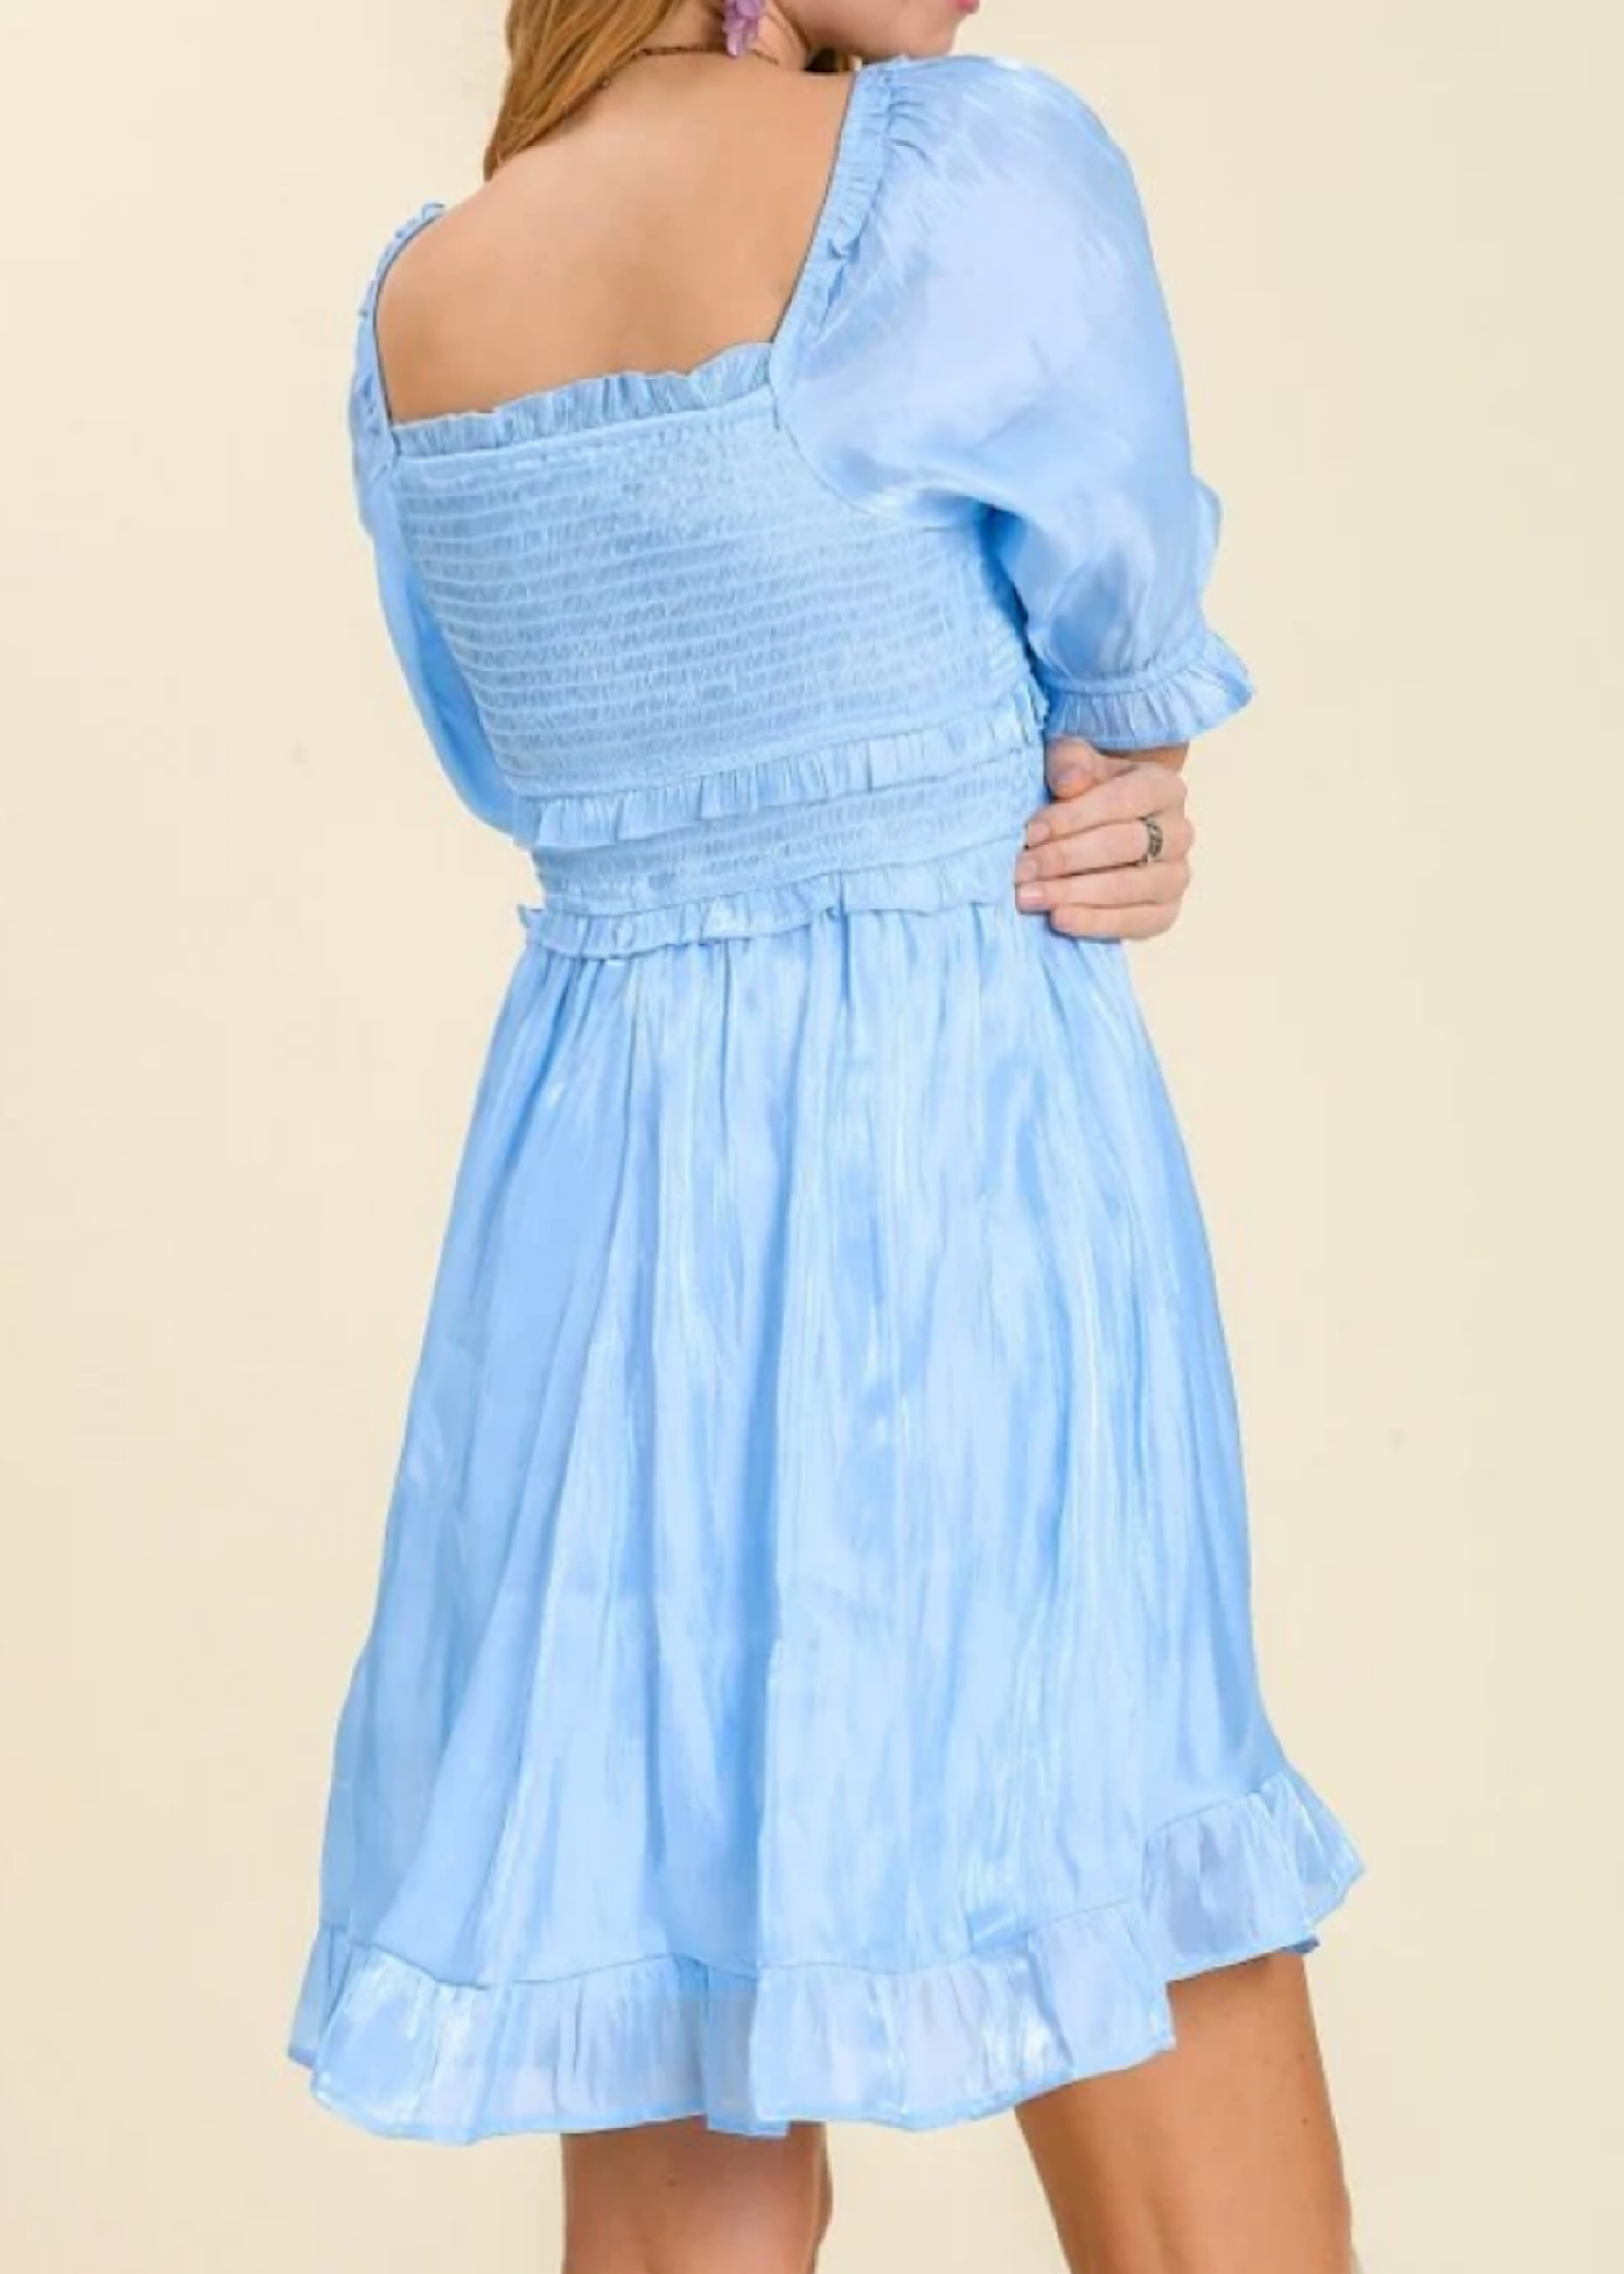 Baby Blue Smocked Dress With Ruffle Detail